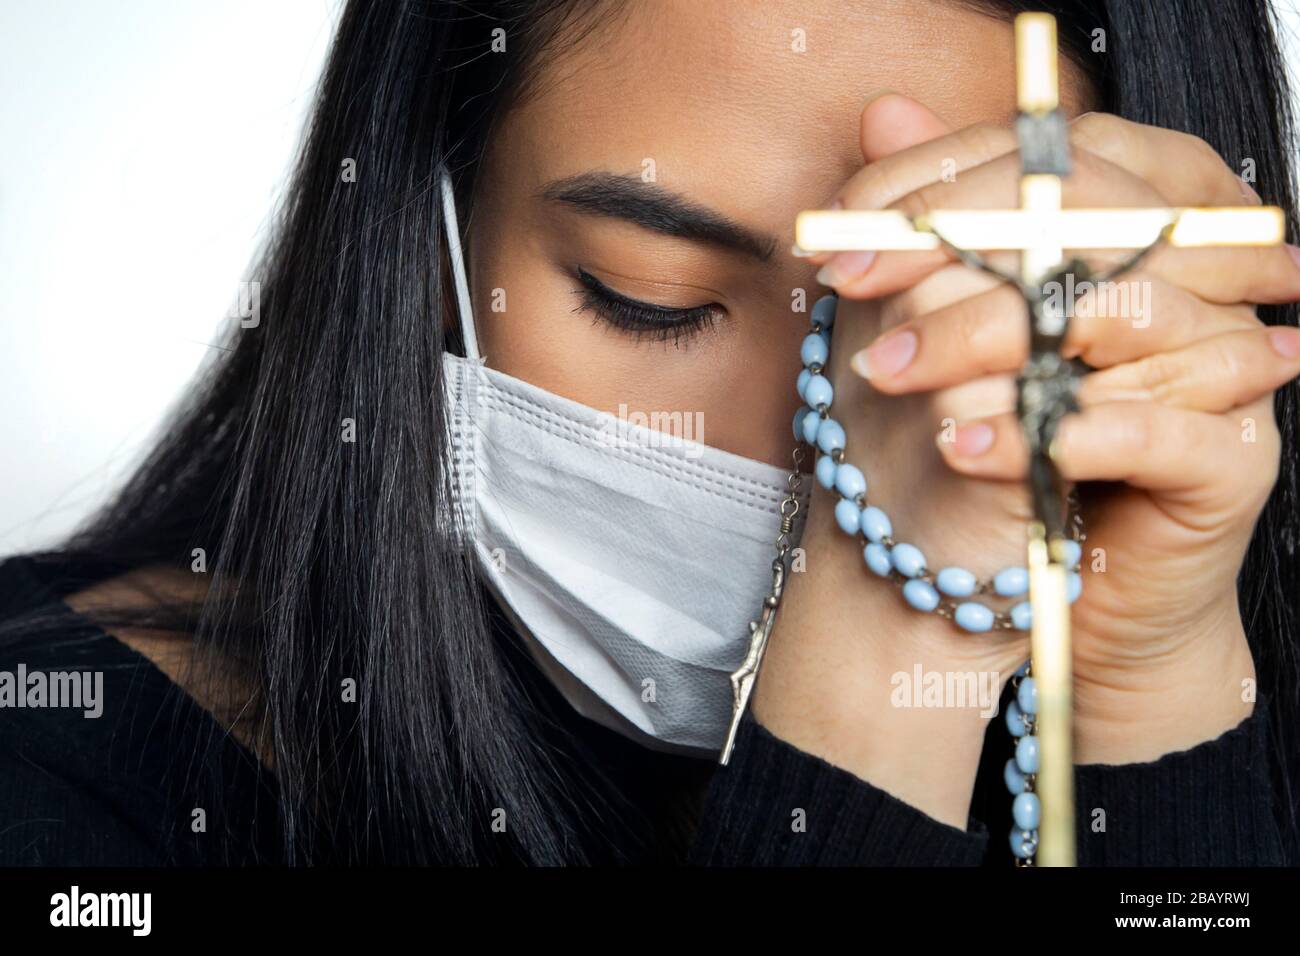 Woman wearing surgical mask praying with rosary. Christian religion hope concept. Stock Photo